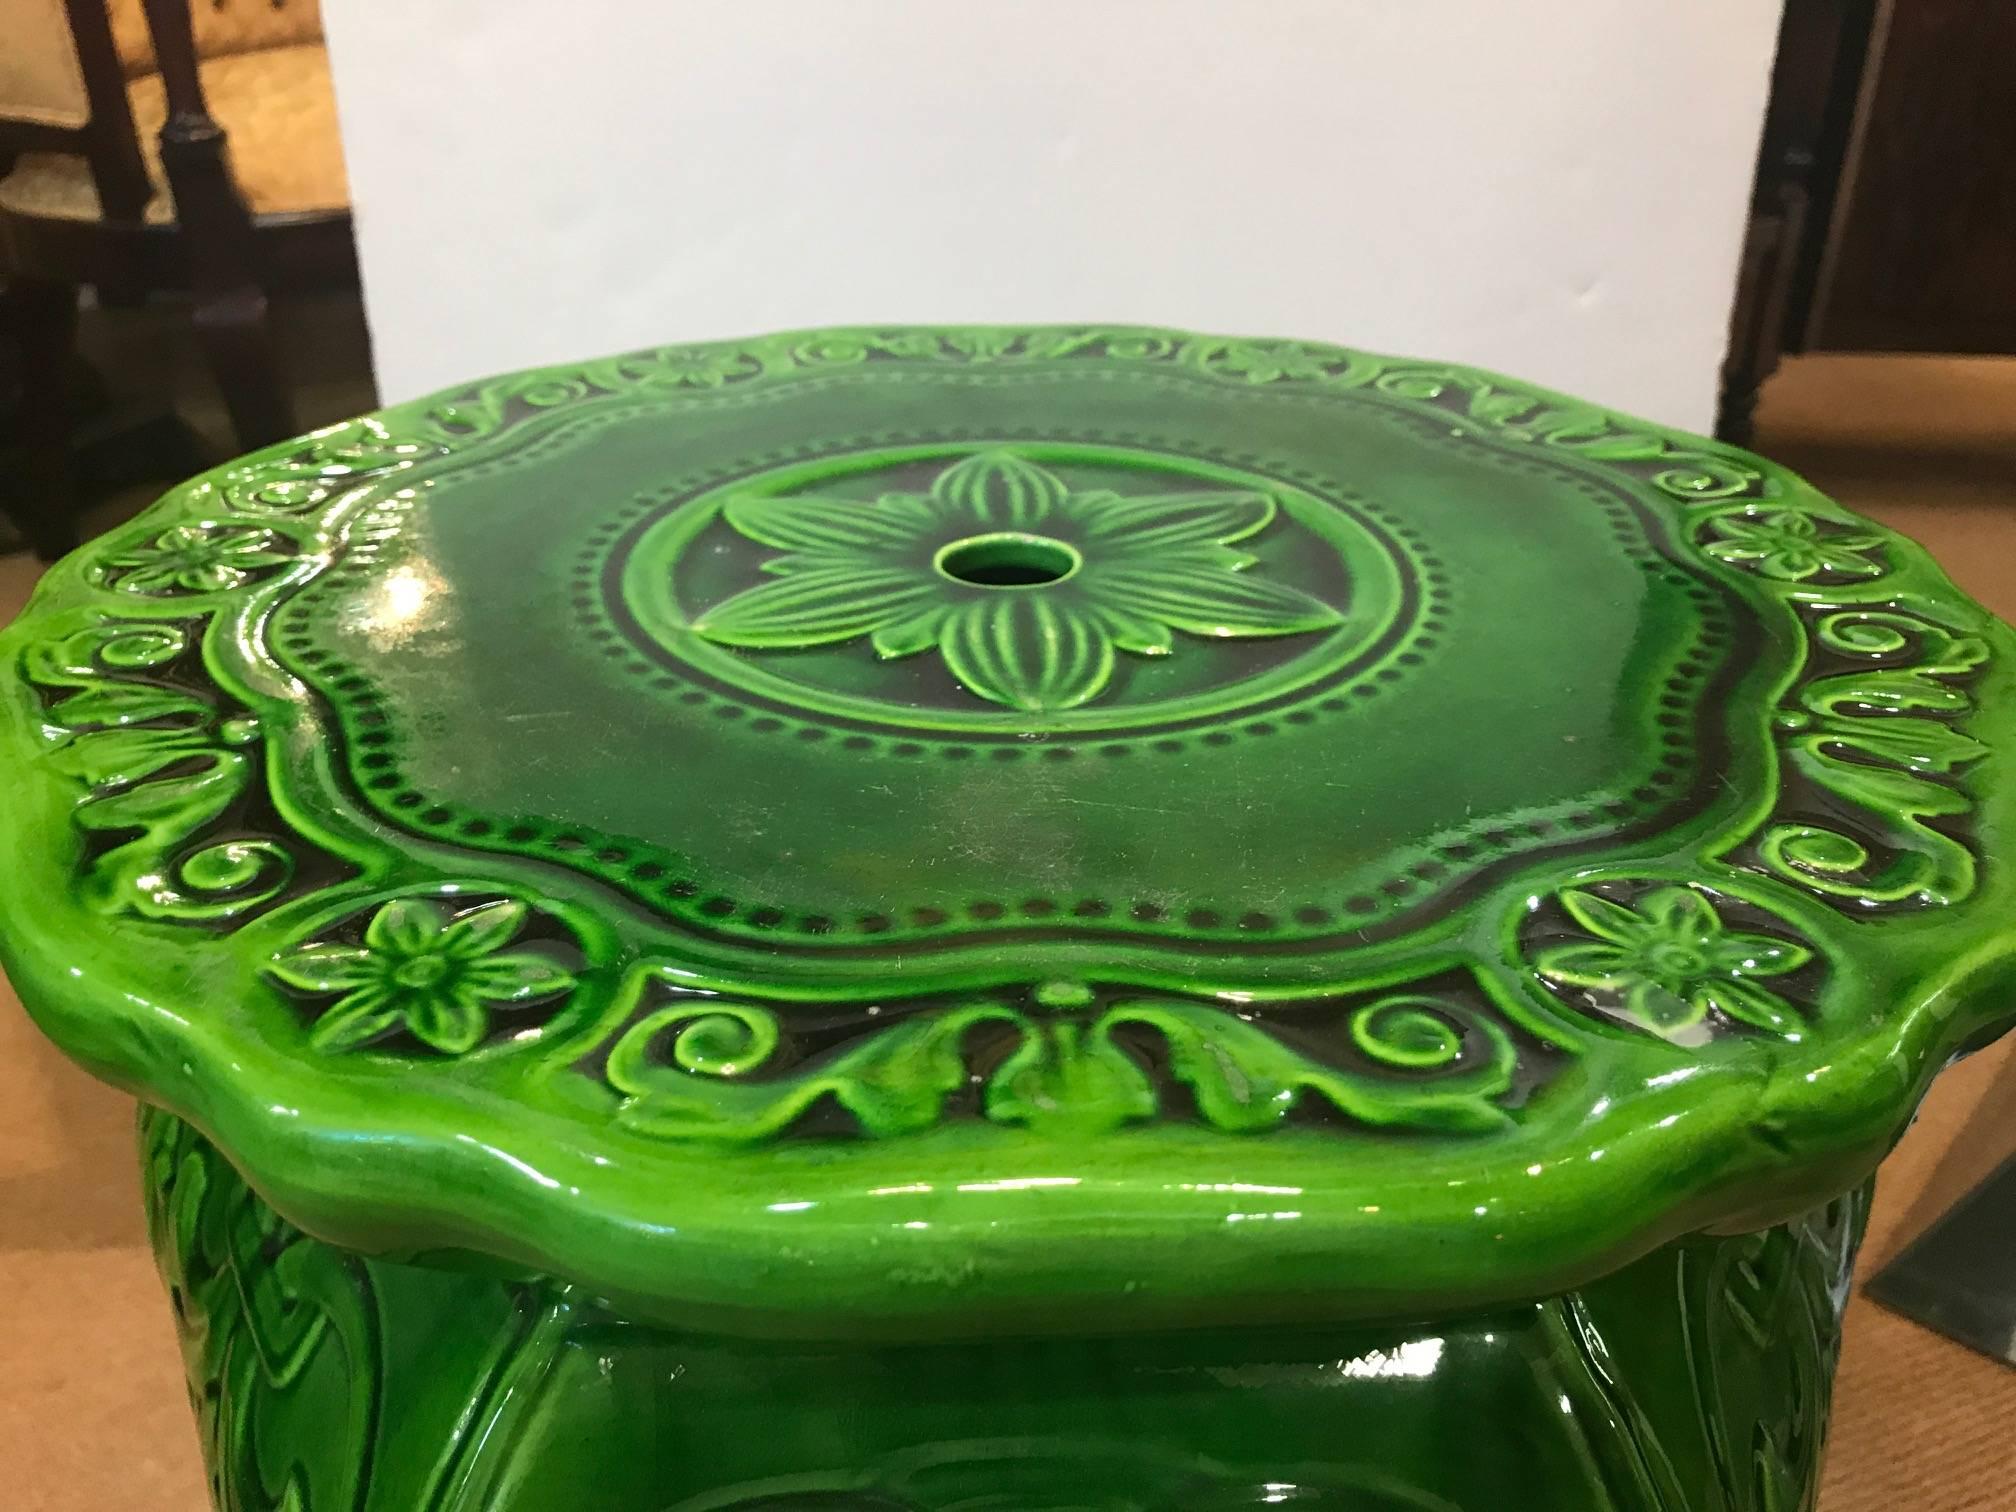 A vibrant green Majolica garden seat, made by Minton, year mark 1897. Designed by Augustus Welby Pugin, hexagonal baluster form body. Marked on the underside Minton and England #18 and mark of the swan. Elegant urn shape.